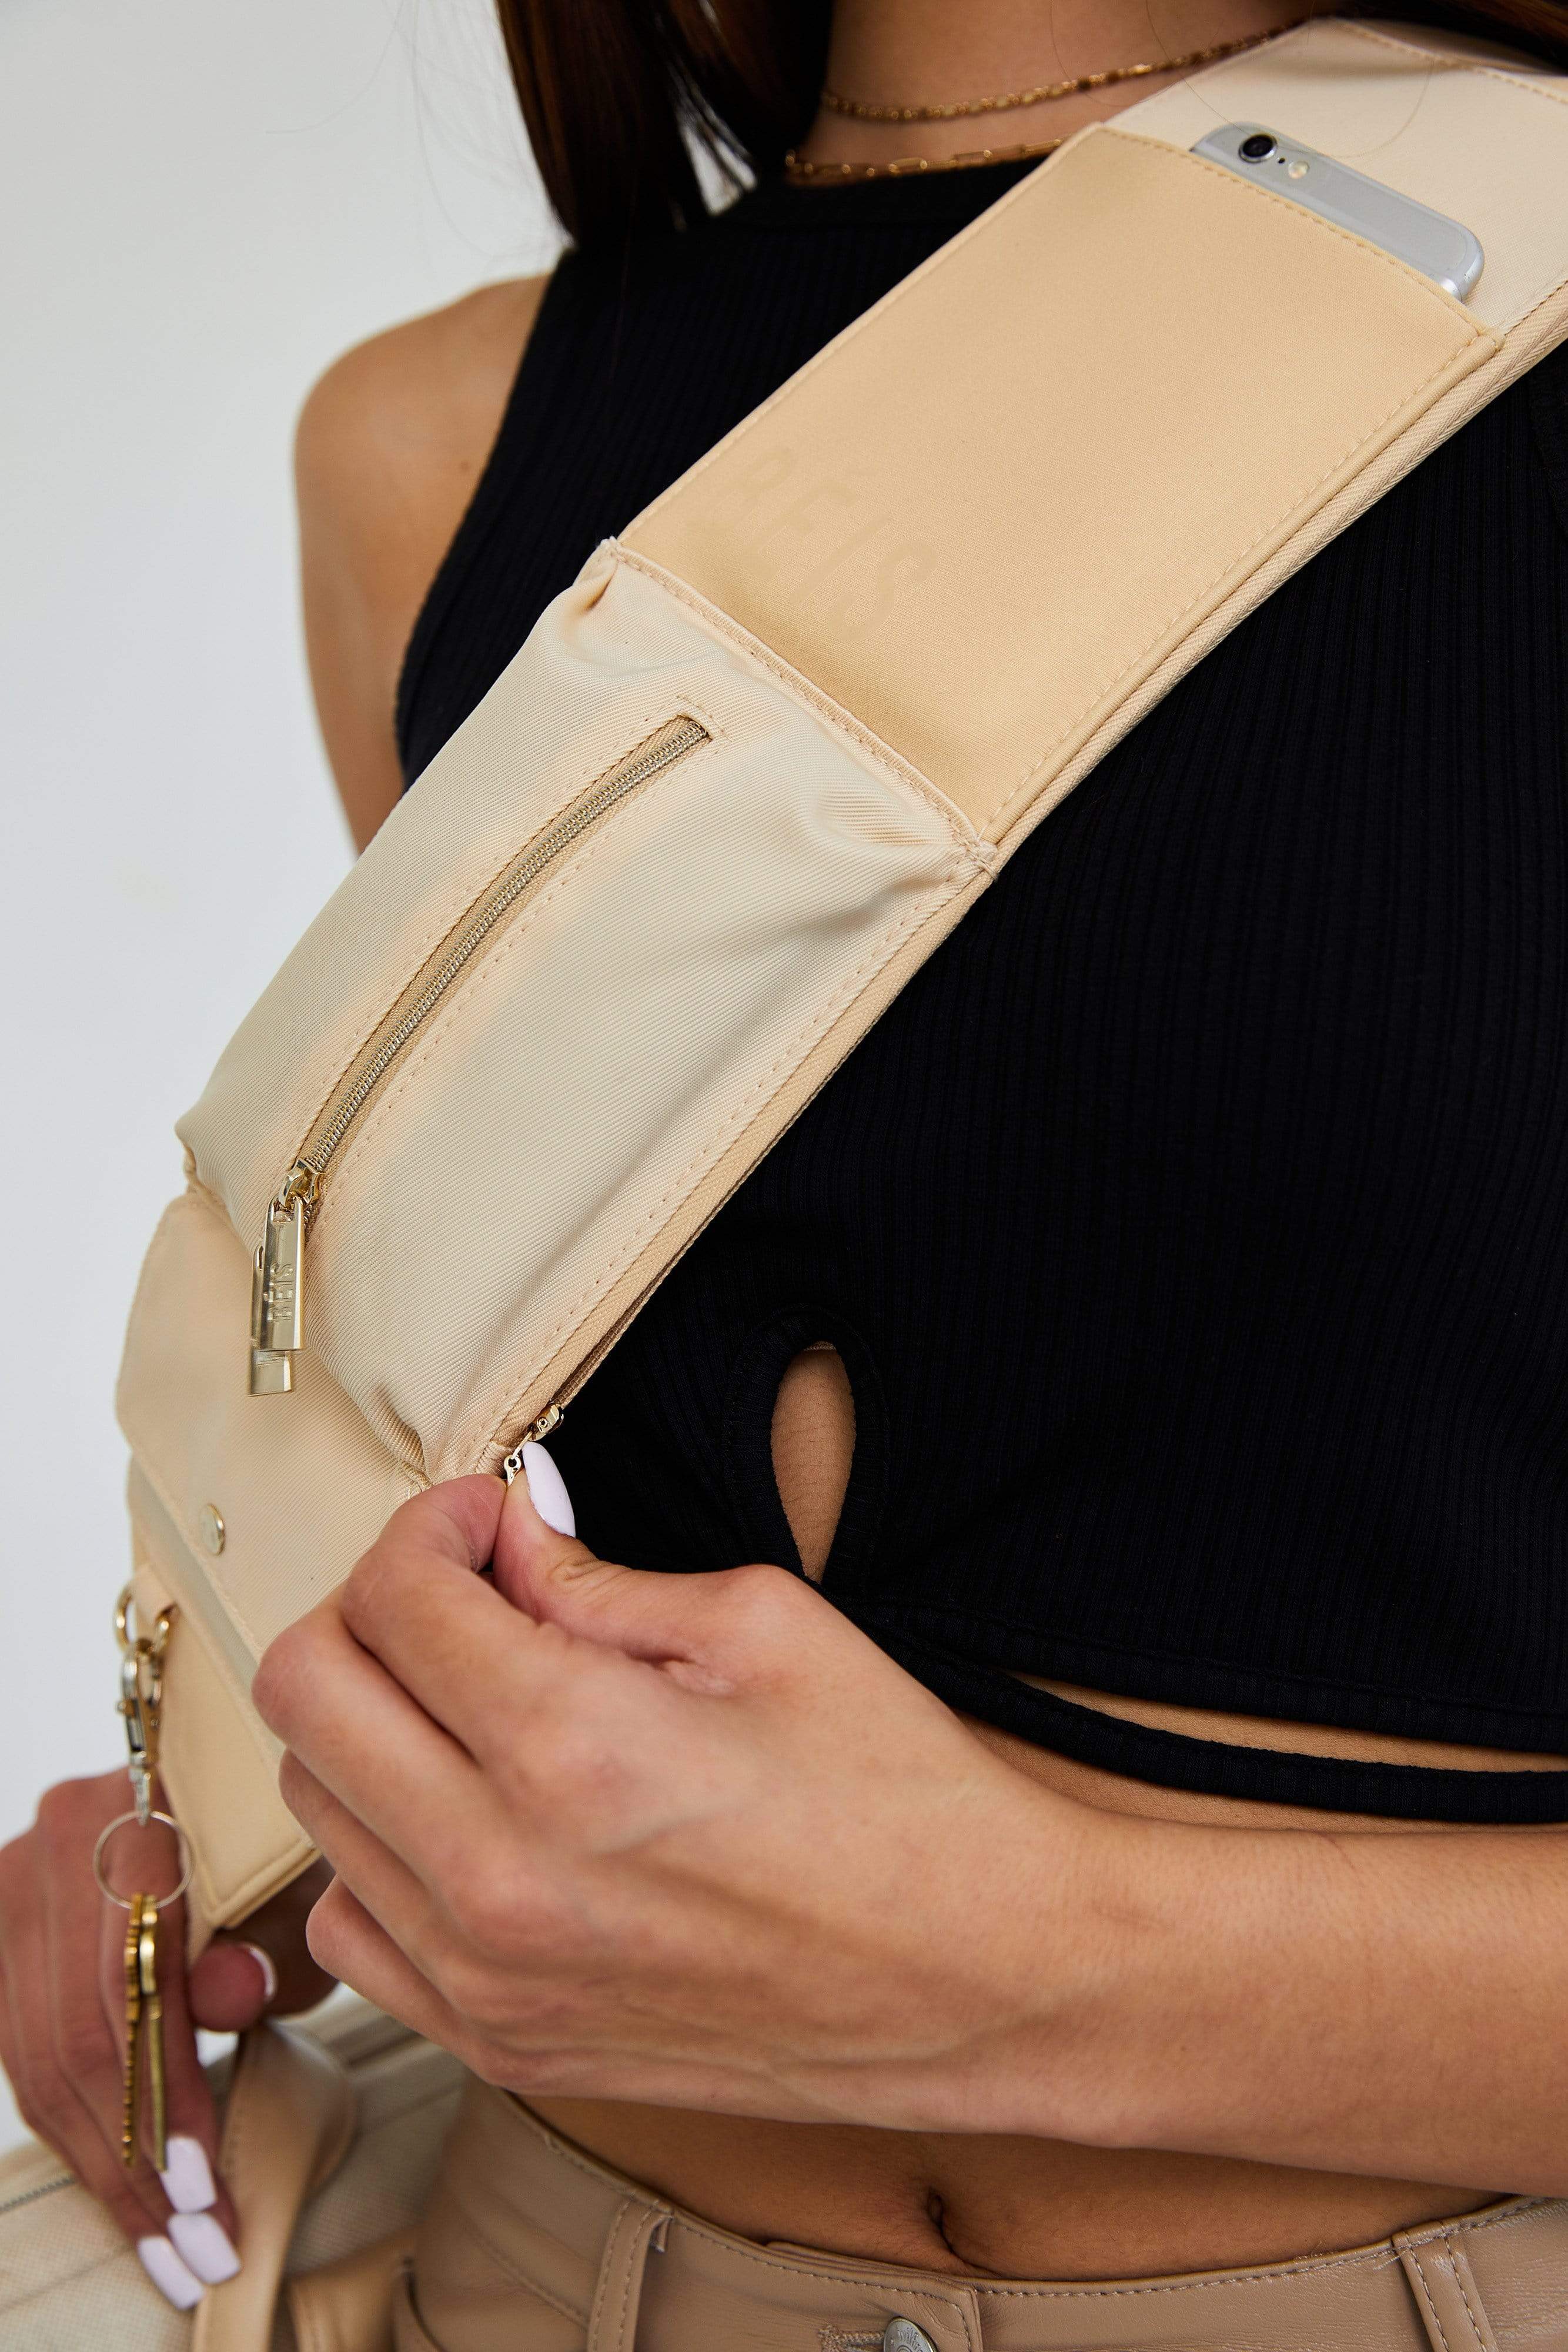 The Survival Strap in Beige